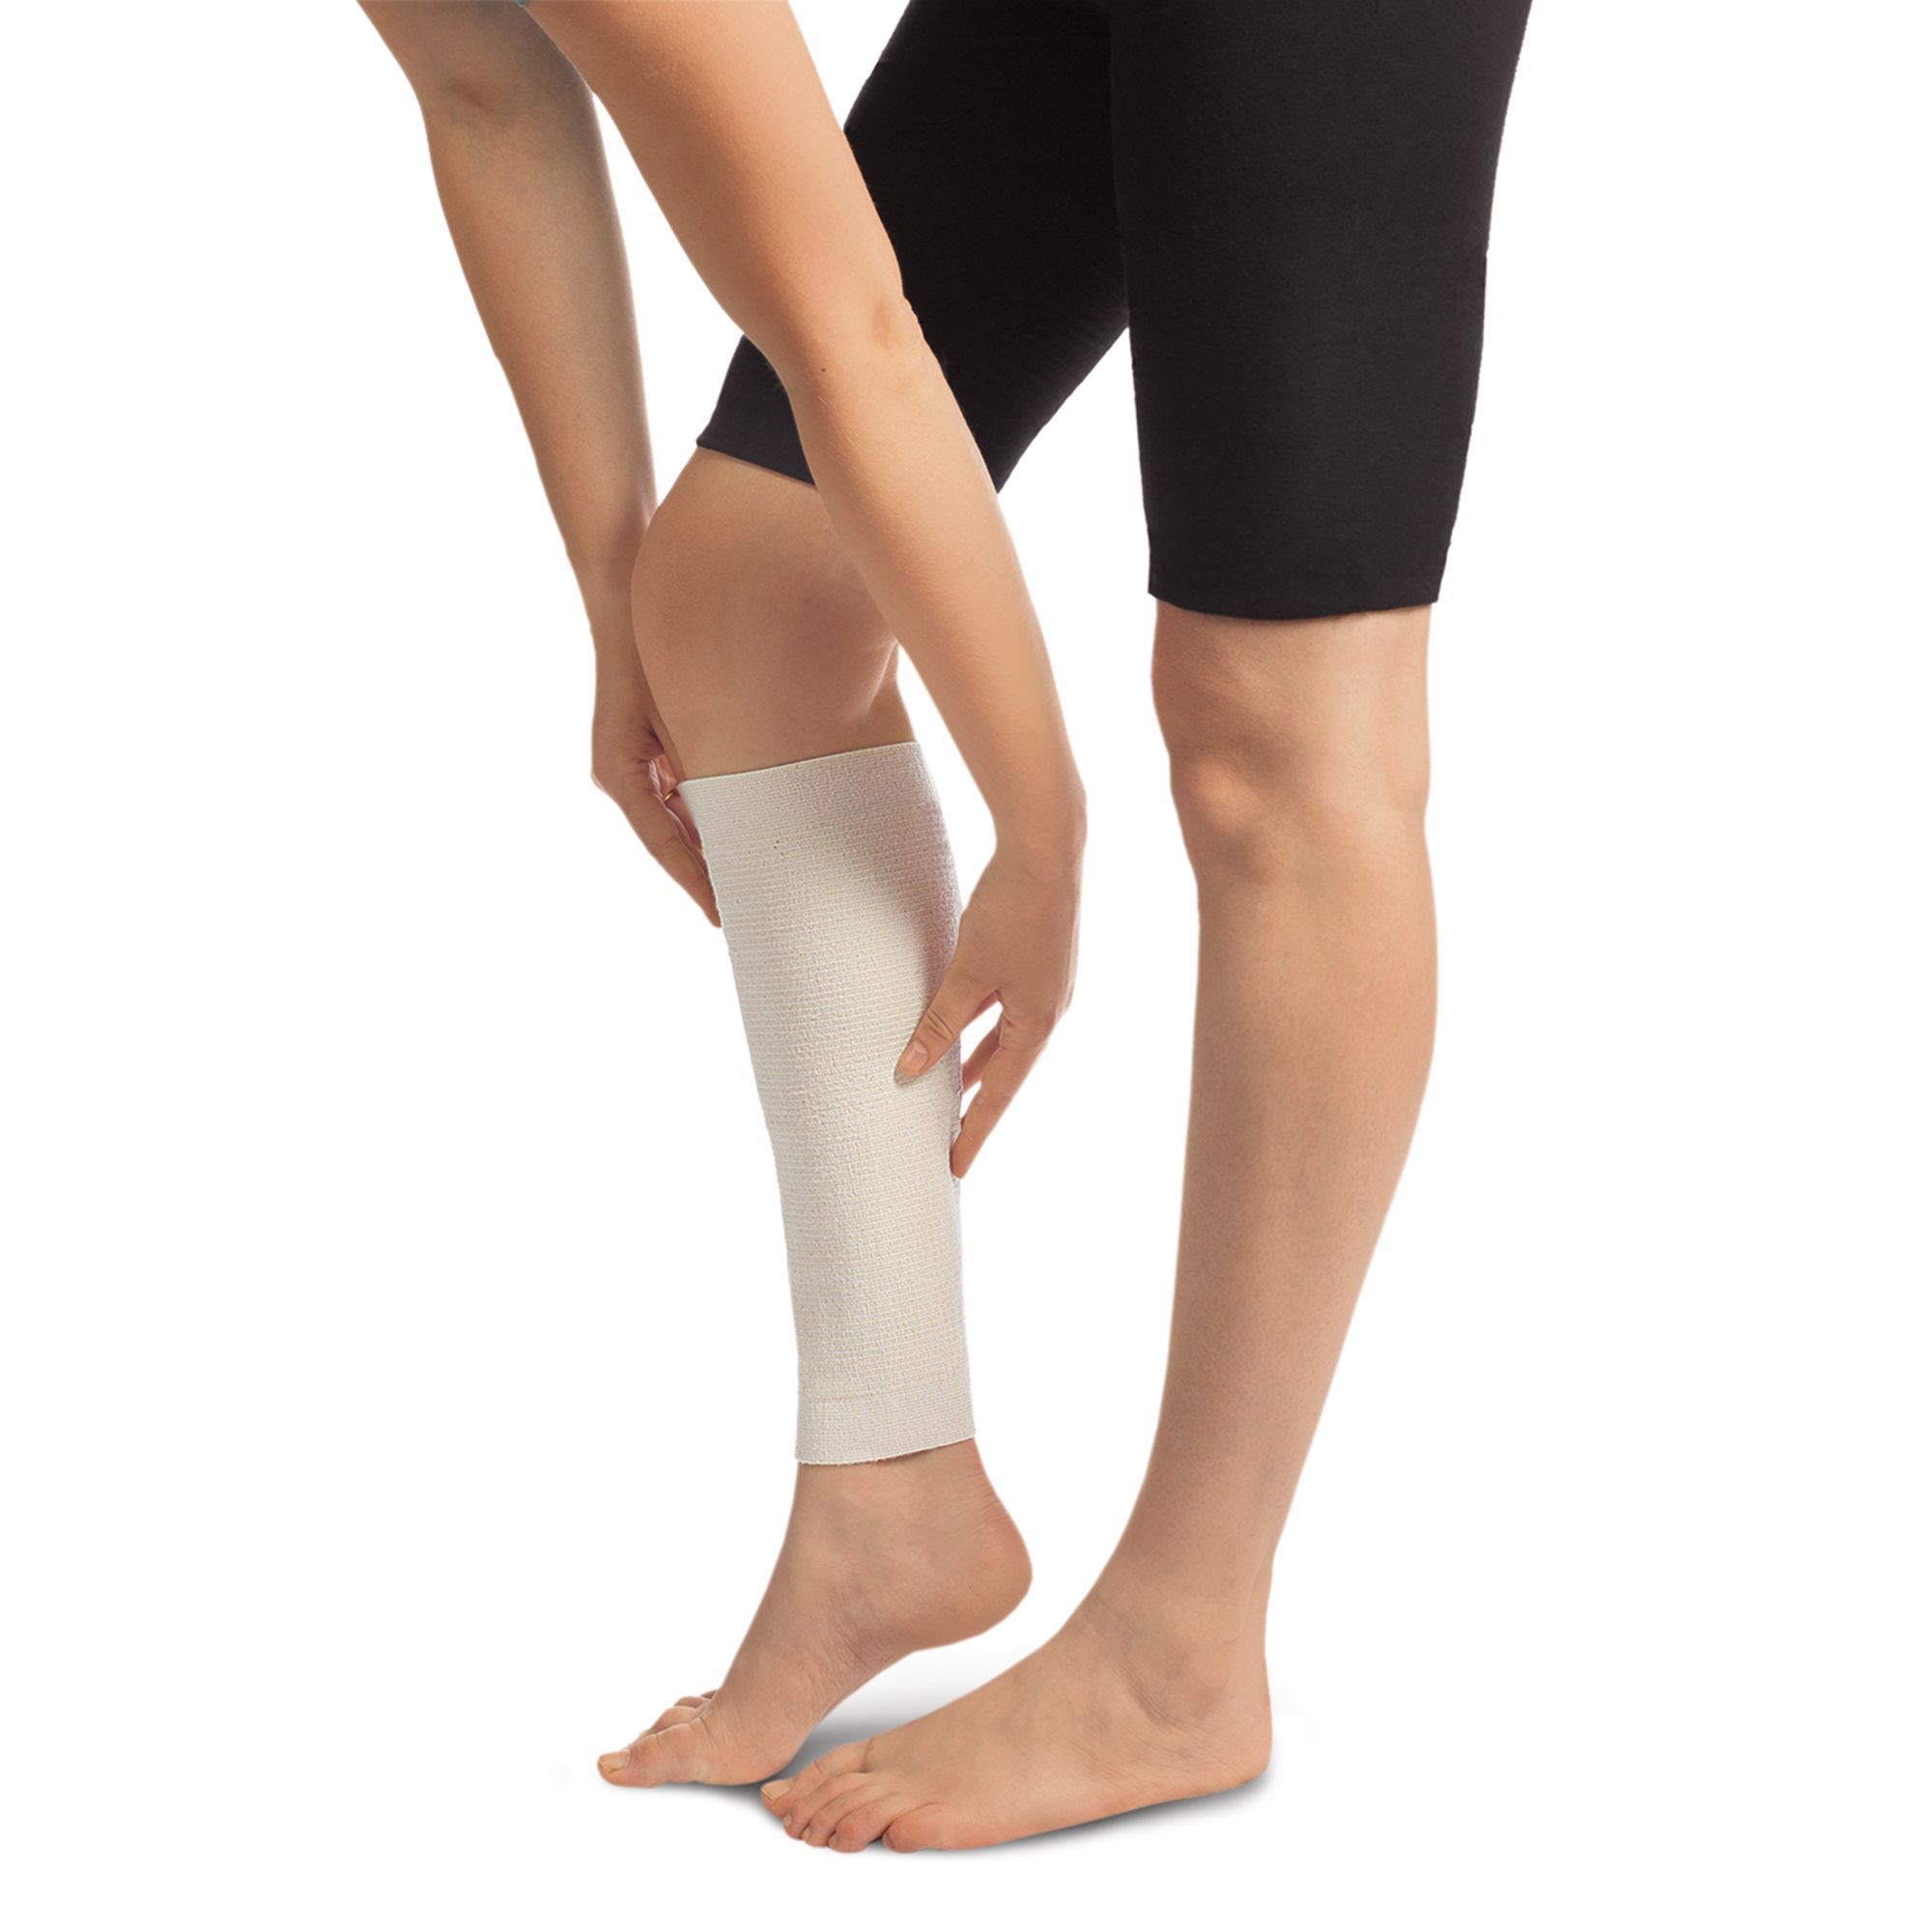 Calf and Leg Supports